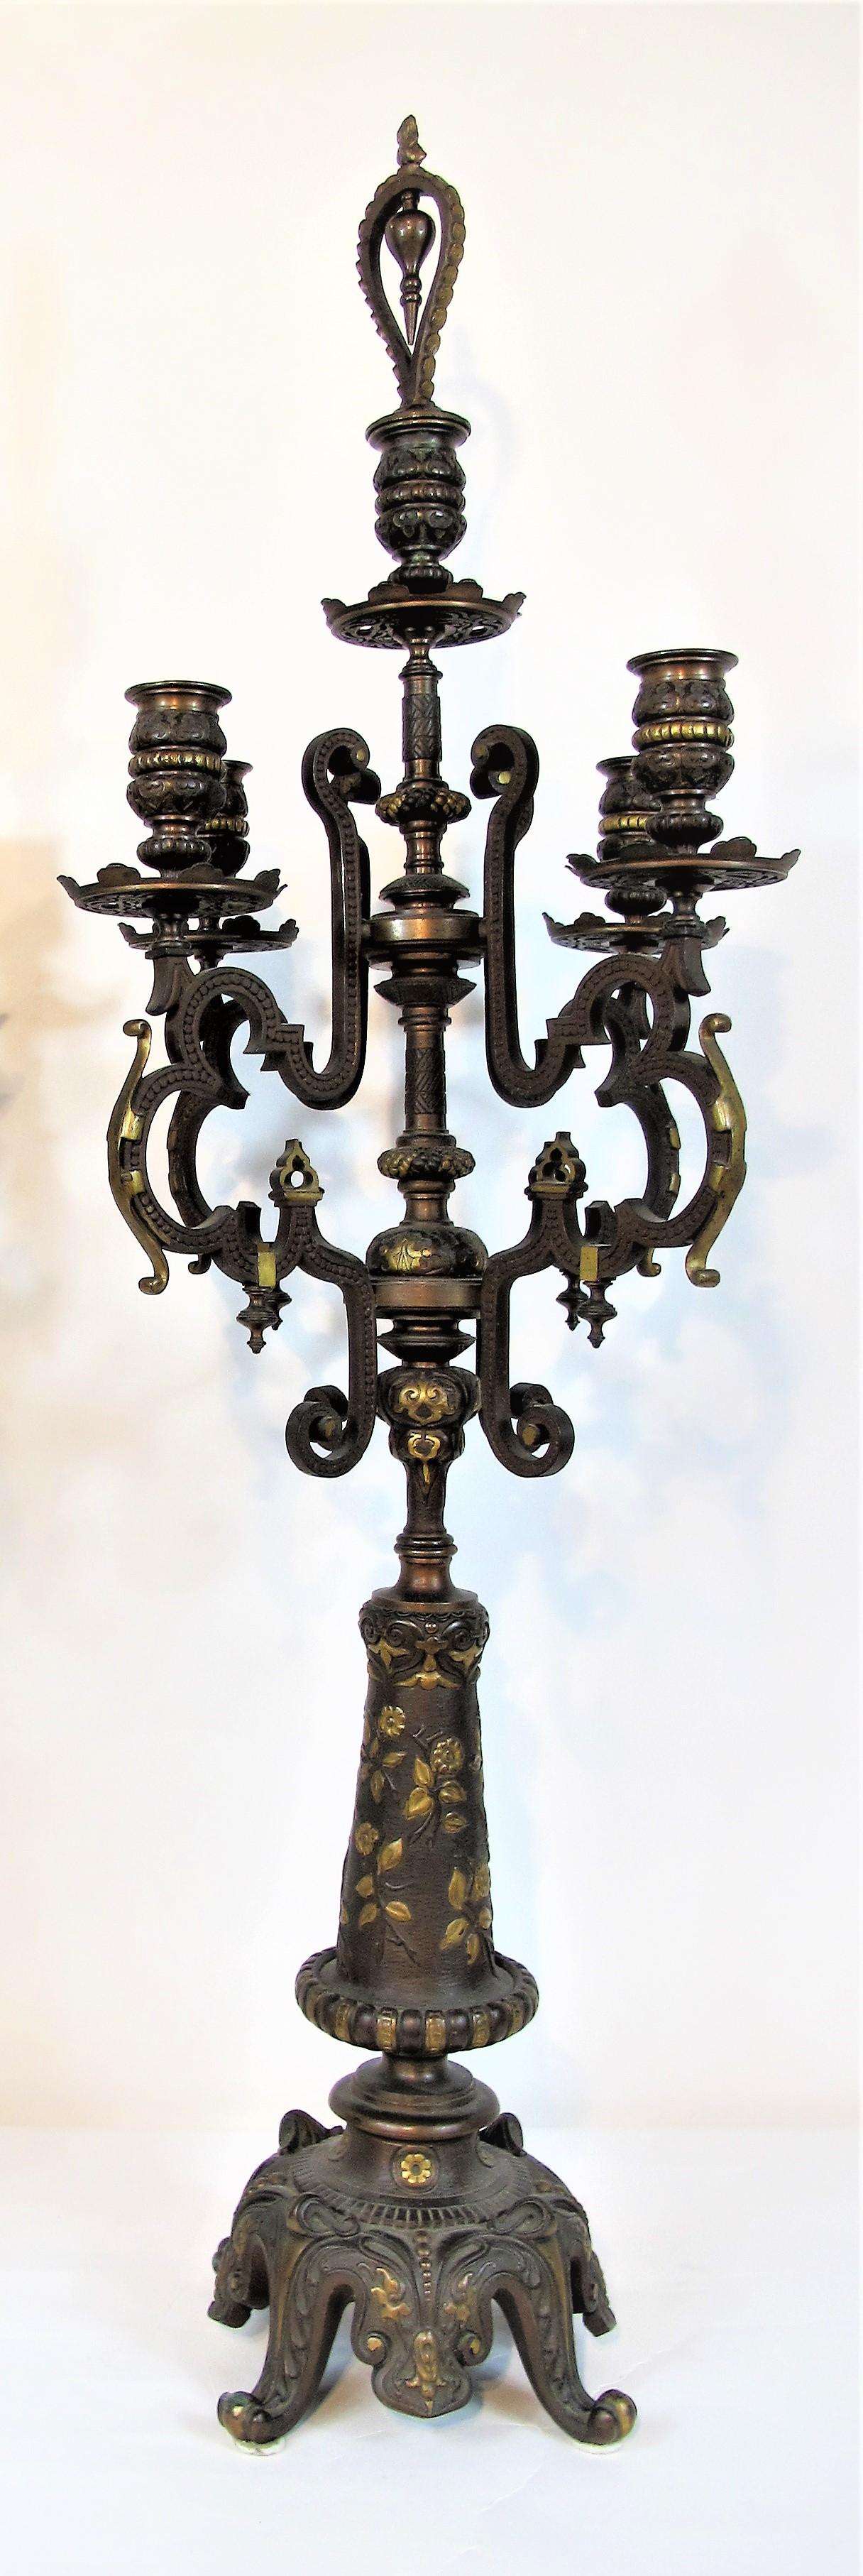 Pair of bronze candelabra in oriental taste with five lights, double patina brown and gold. The cylindrical shaft is carved with flowers and sconces are adorned with friezes of arabesques and pearls. F. Barbedienne signature on the base.

About